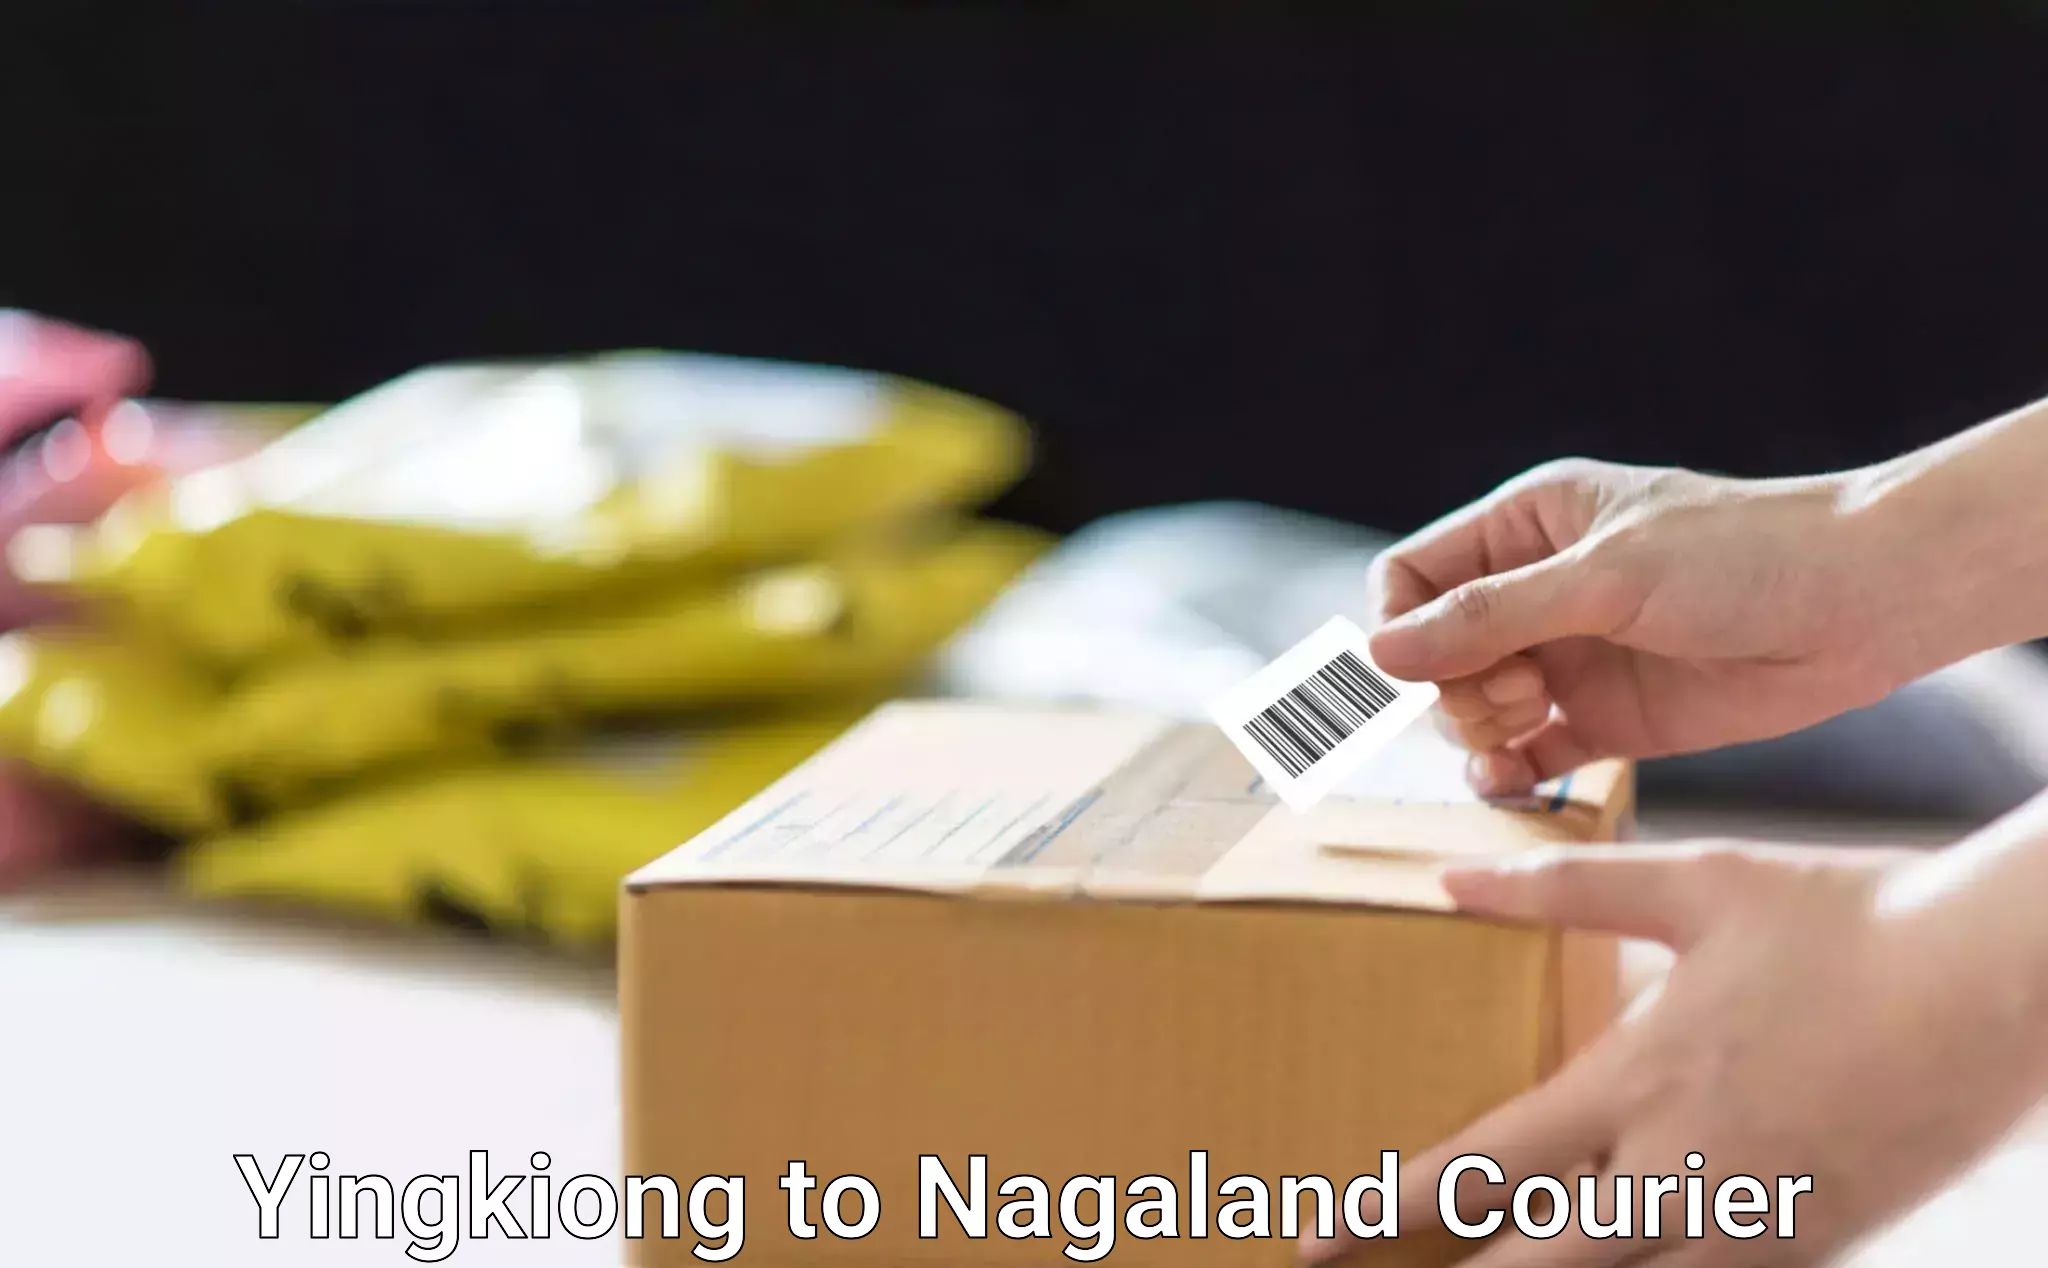 Package delivery network Yingkiong to Nagaland